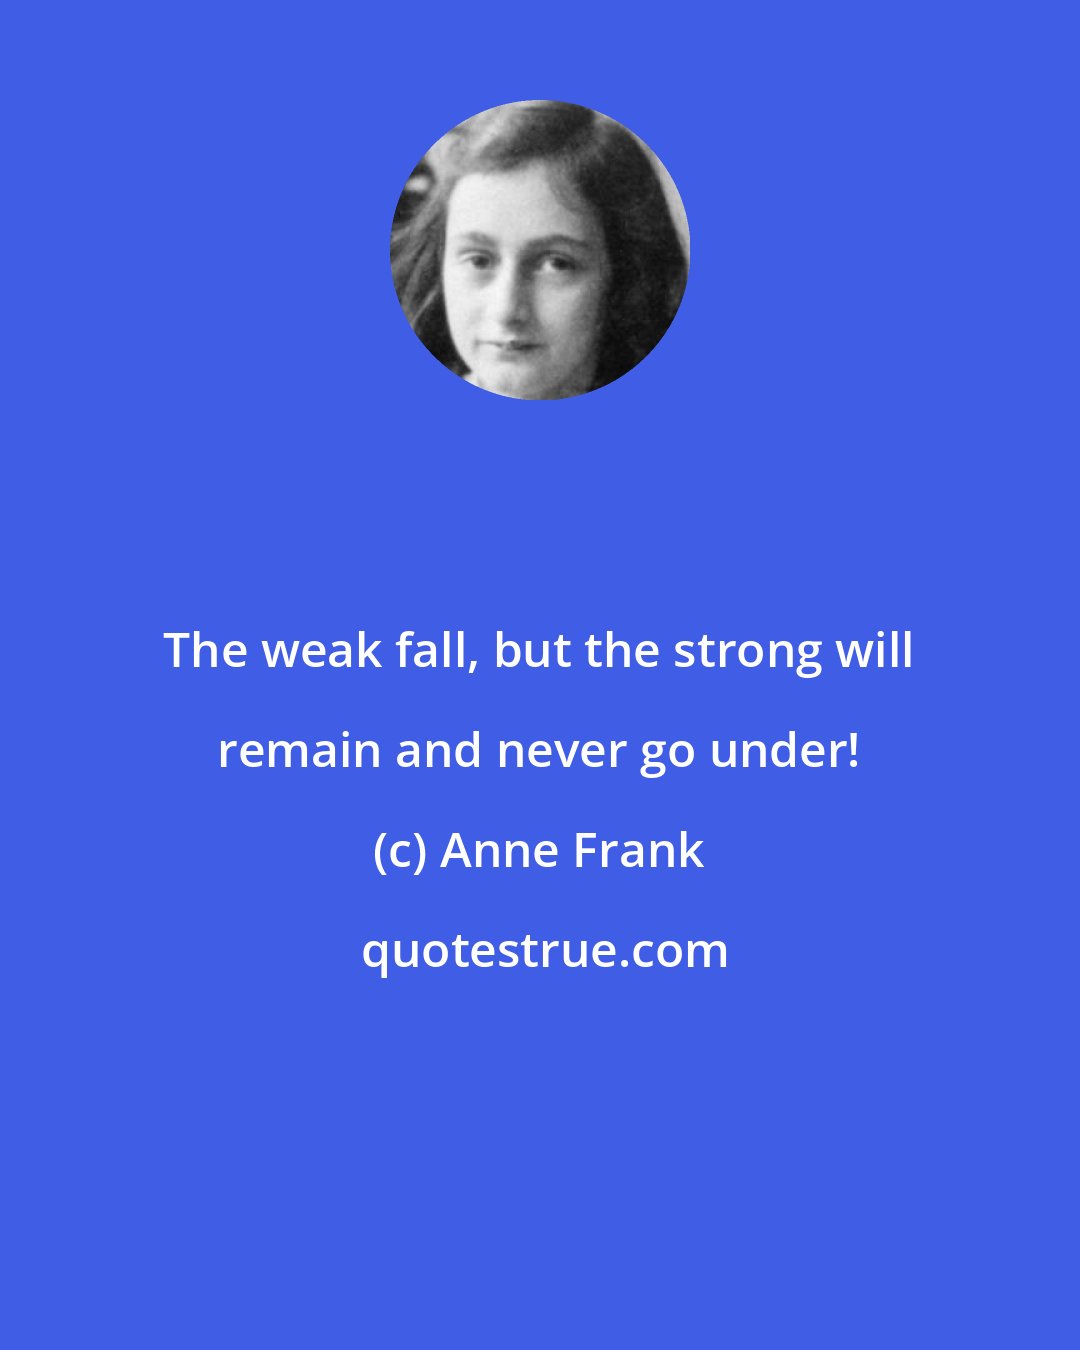 Anne Frank: The weak fall, but the strong will remain and never go under!